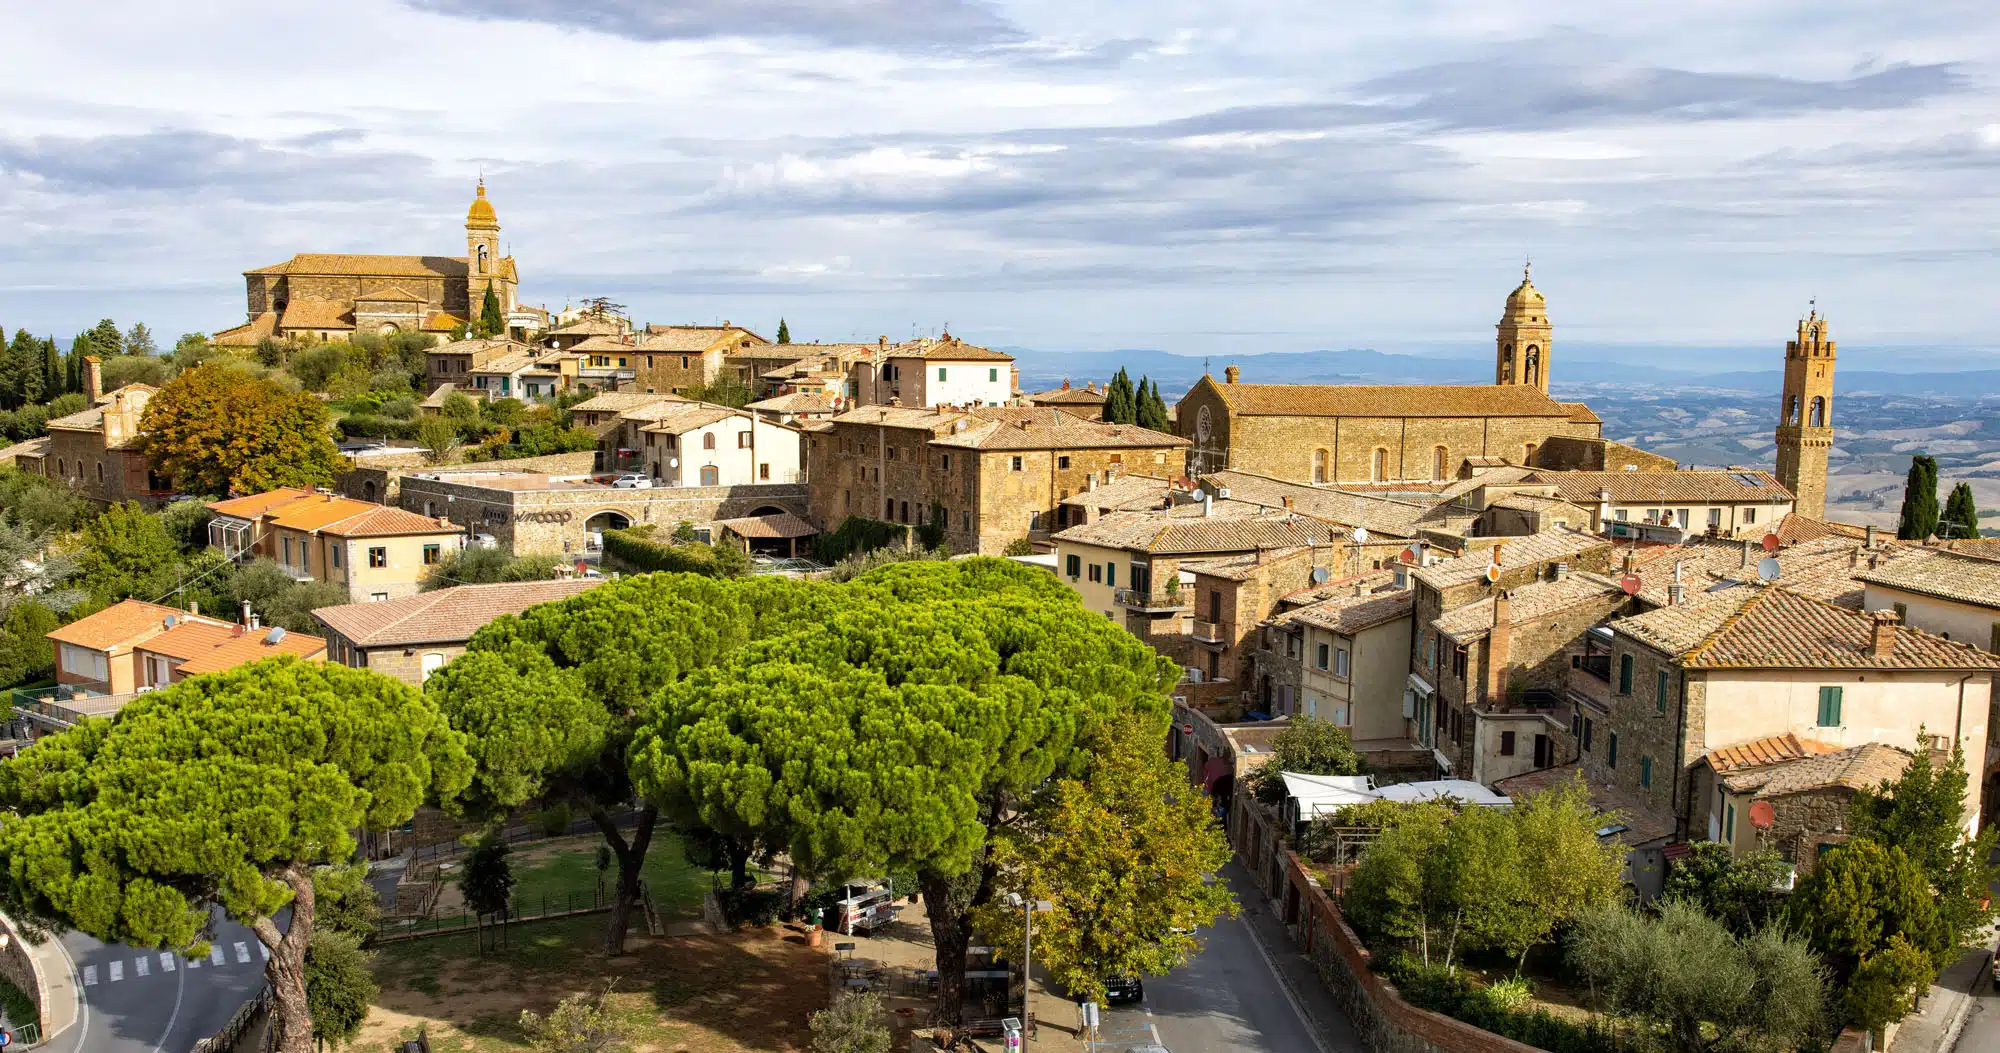 Featured image for “5 Wonderful Things to Do in Montalcino, Italy”